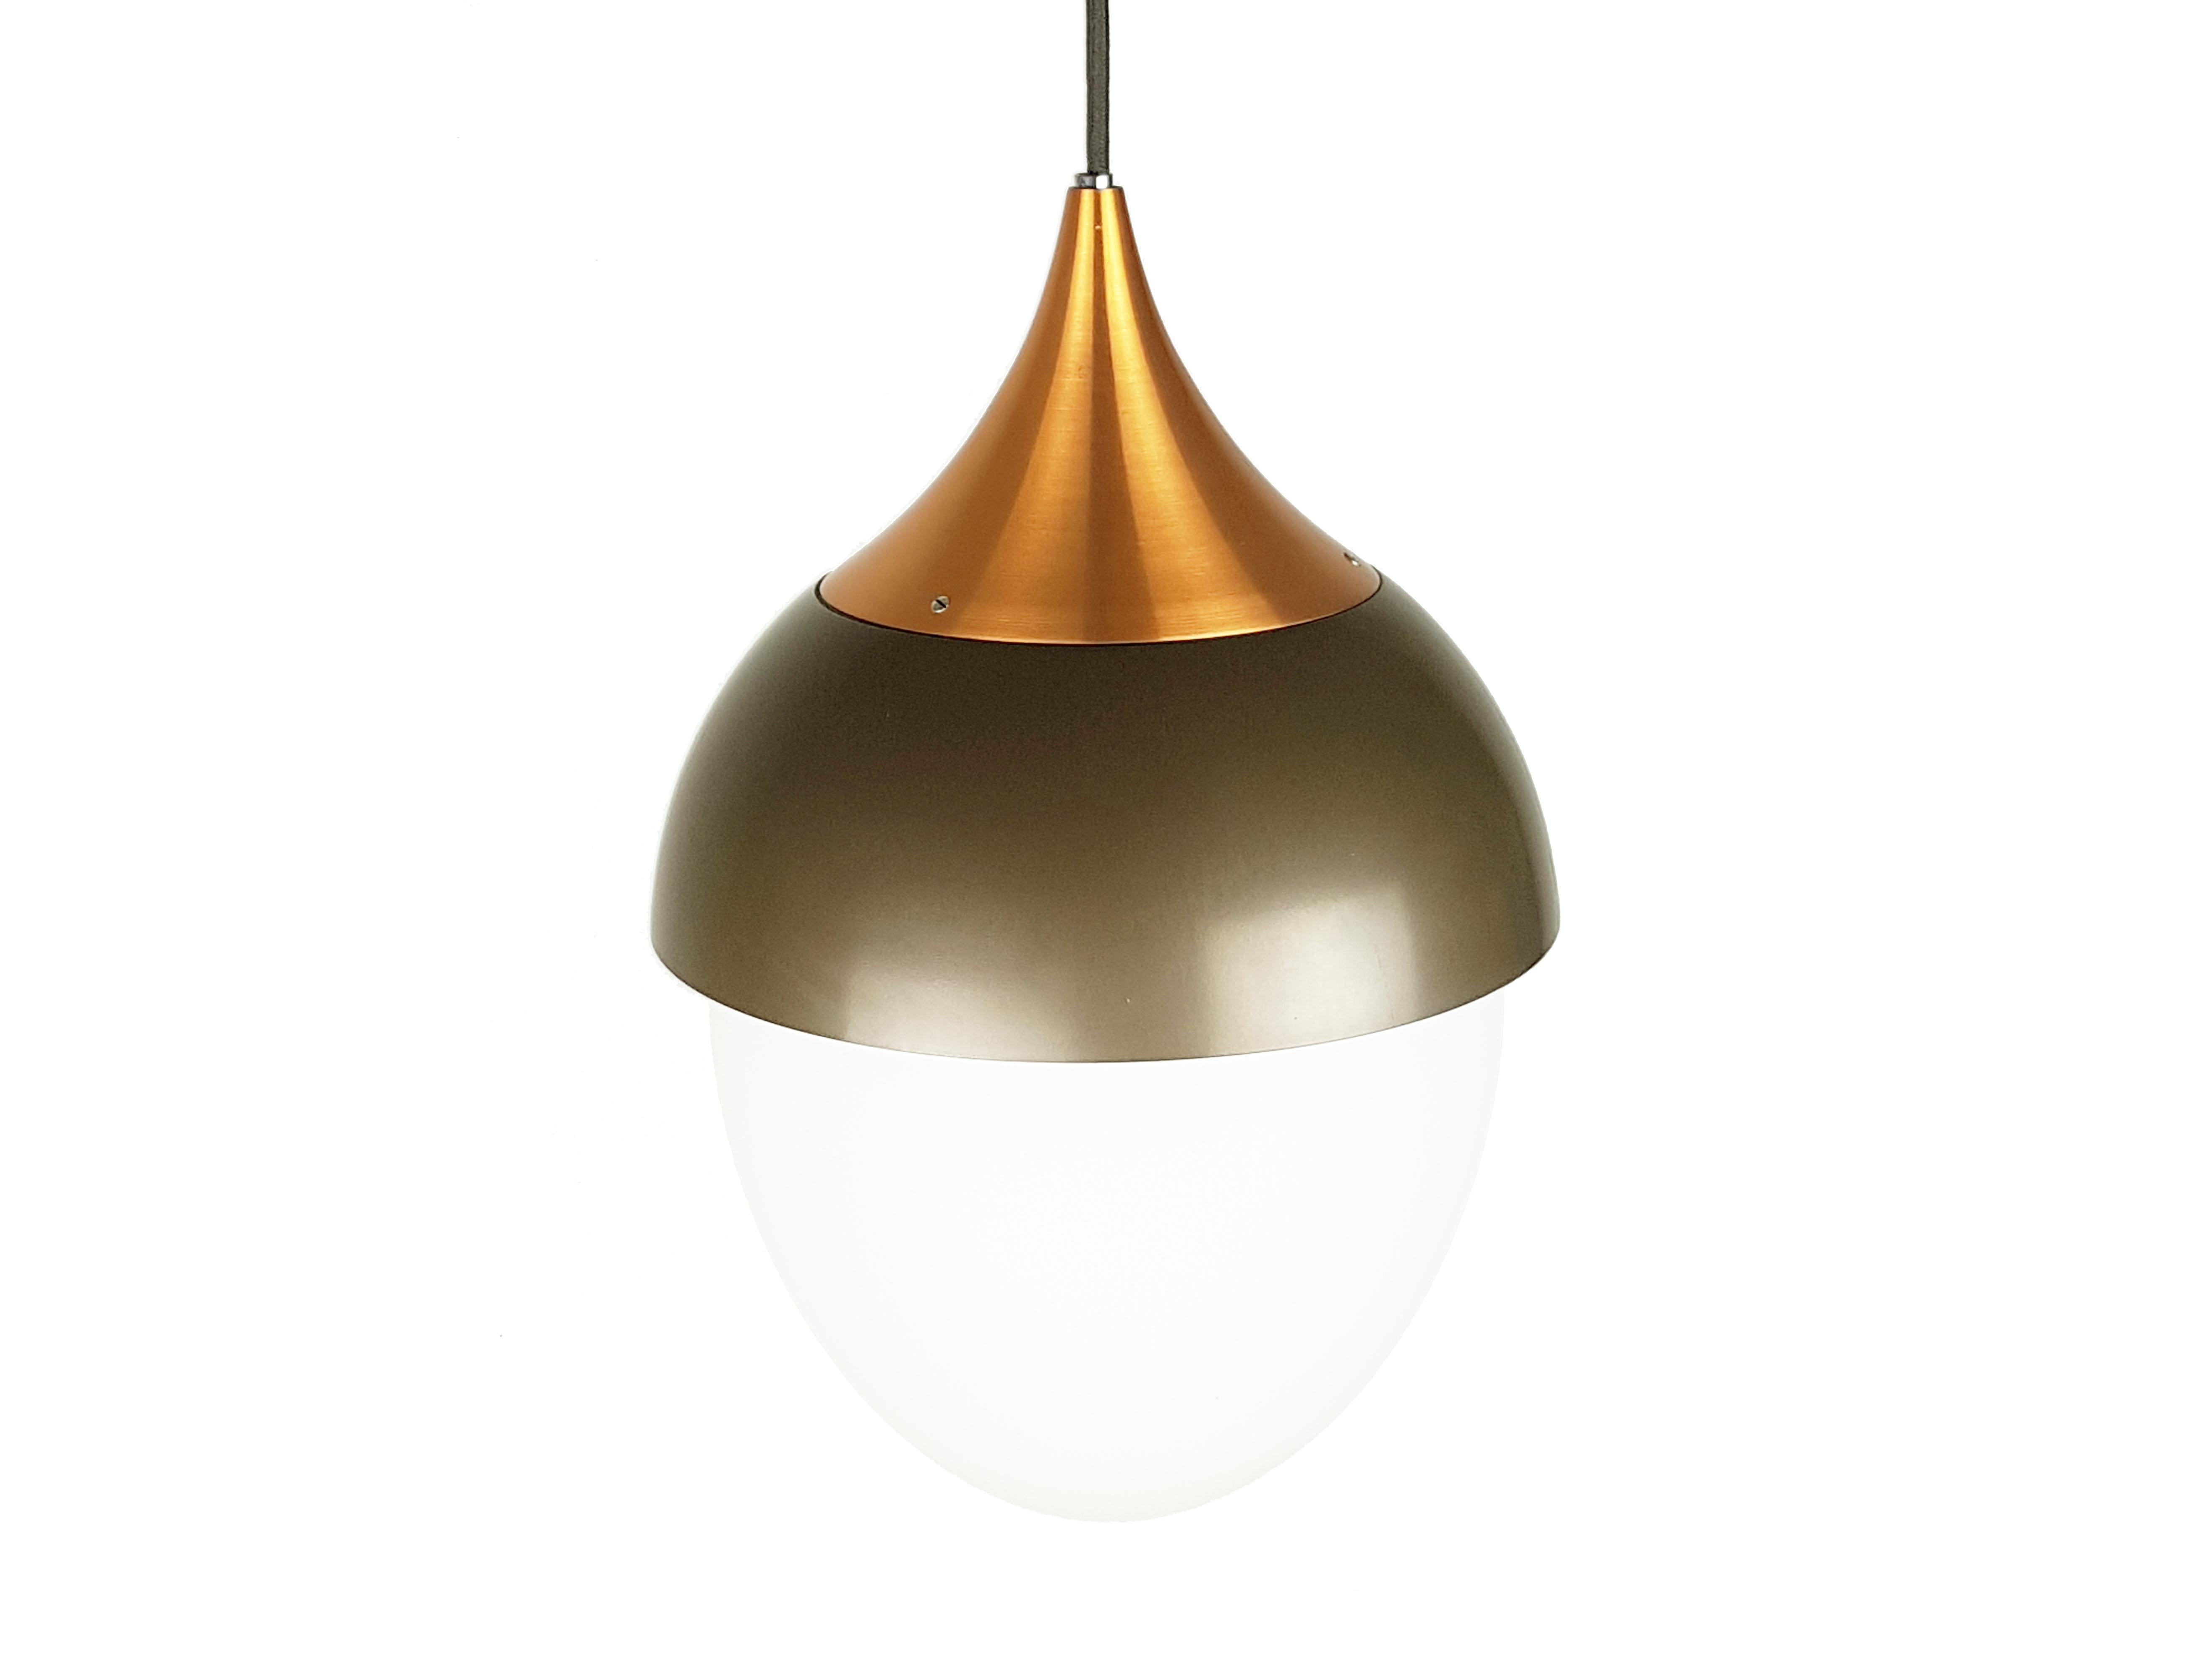 A rare and elegant pendant lamp produced by Stilnovo in the 1960s.The main body of the lamp consists of 3 elements: 2 in brown and copper painted metal and a white sandblasted glass lampshade. Its design resembles the shape of an acorn. 
Stilnovo